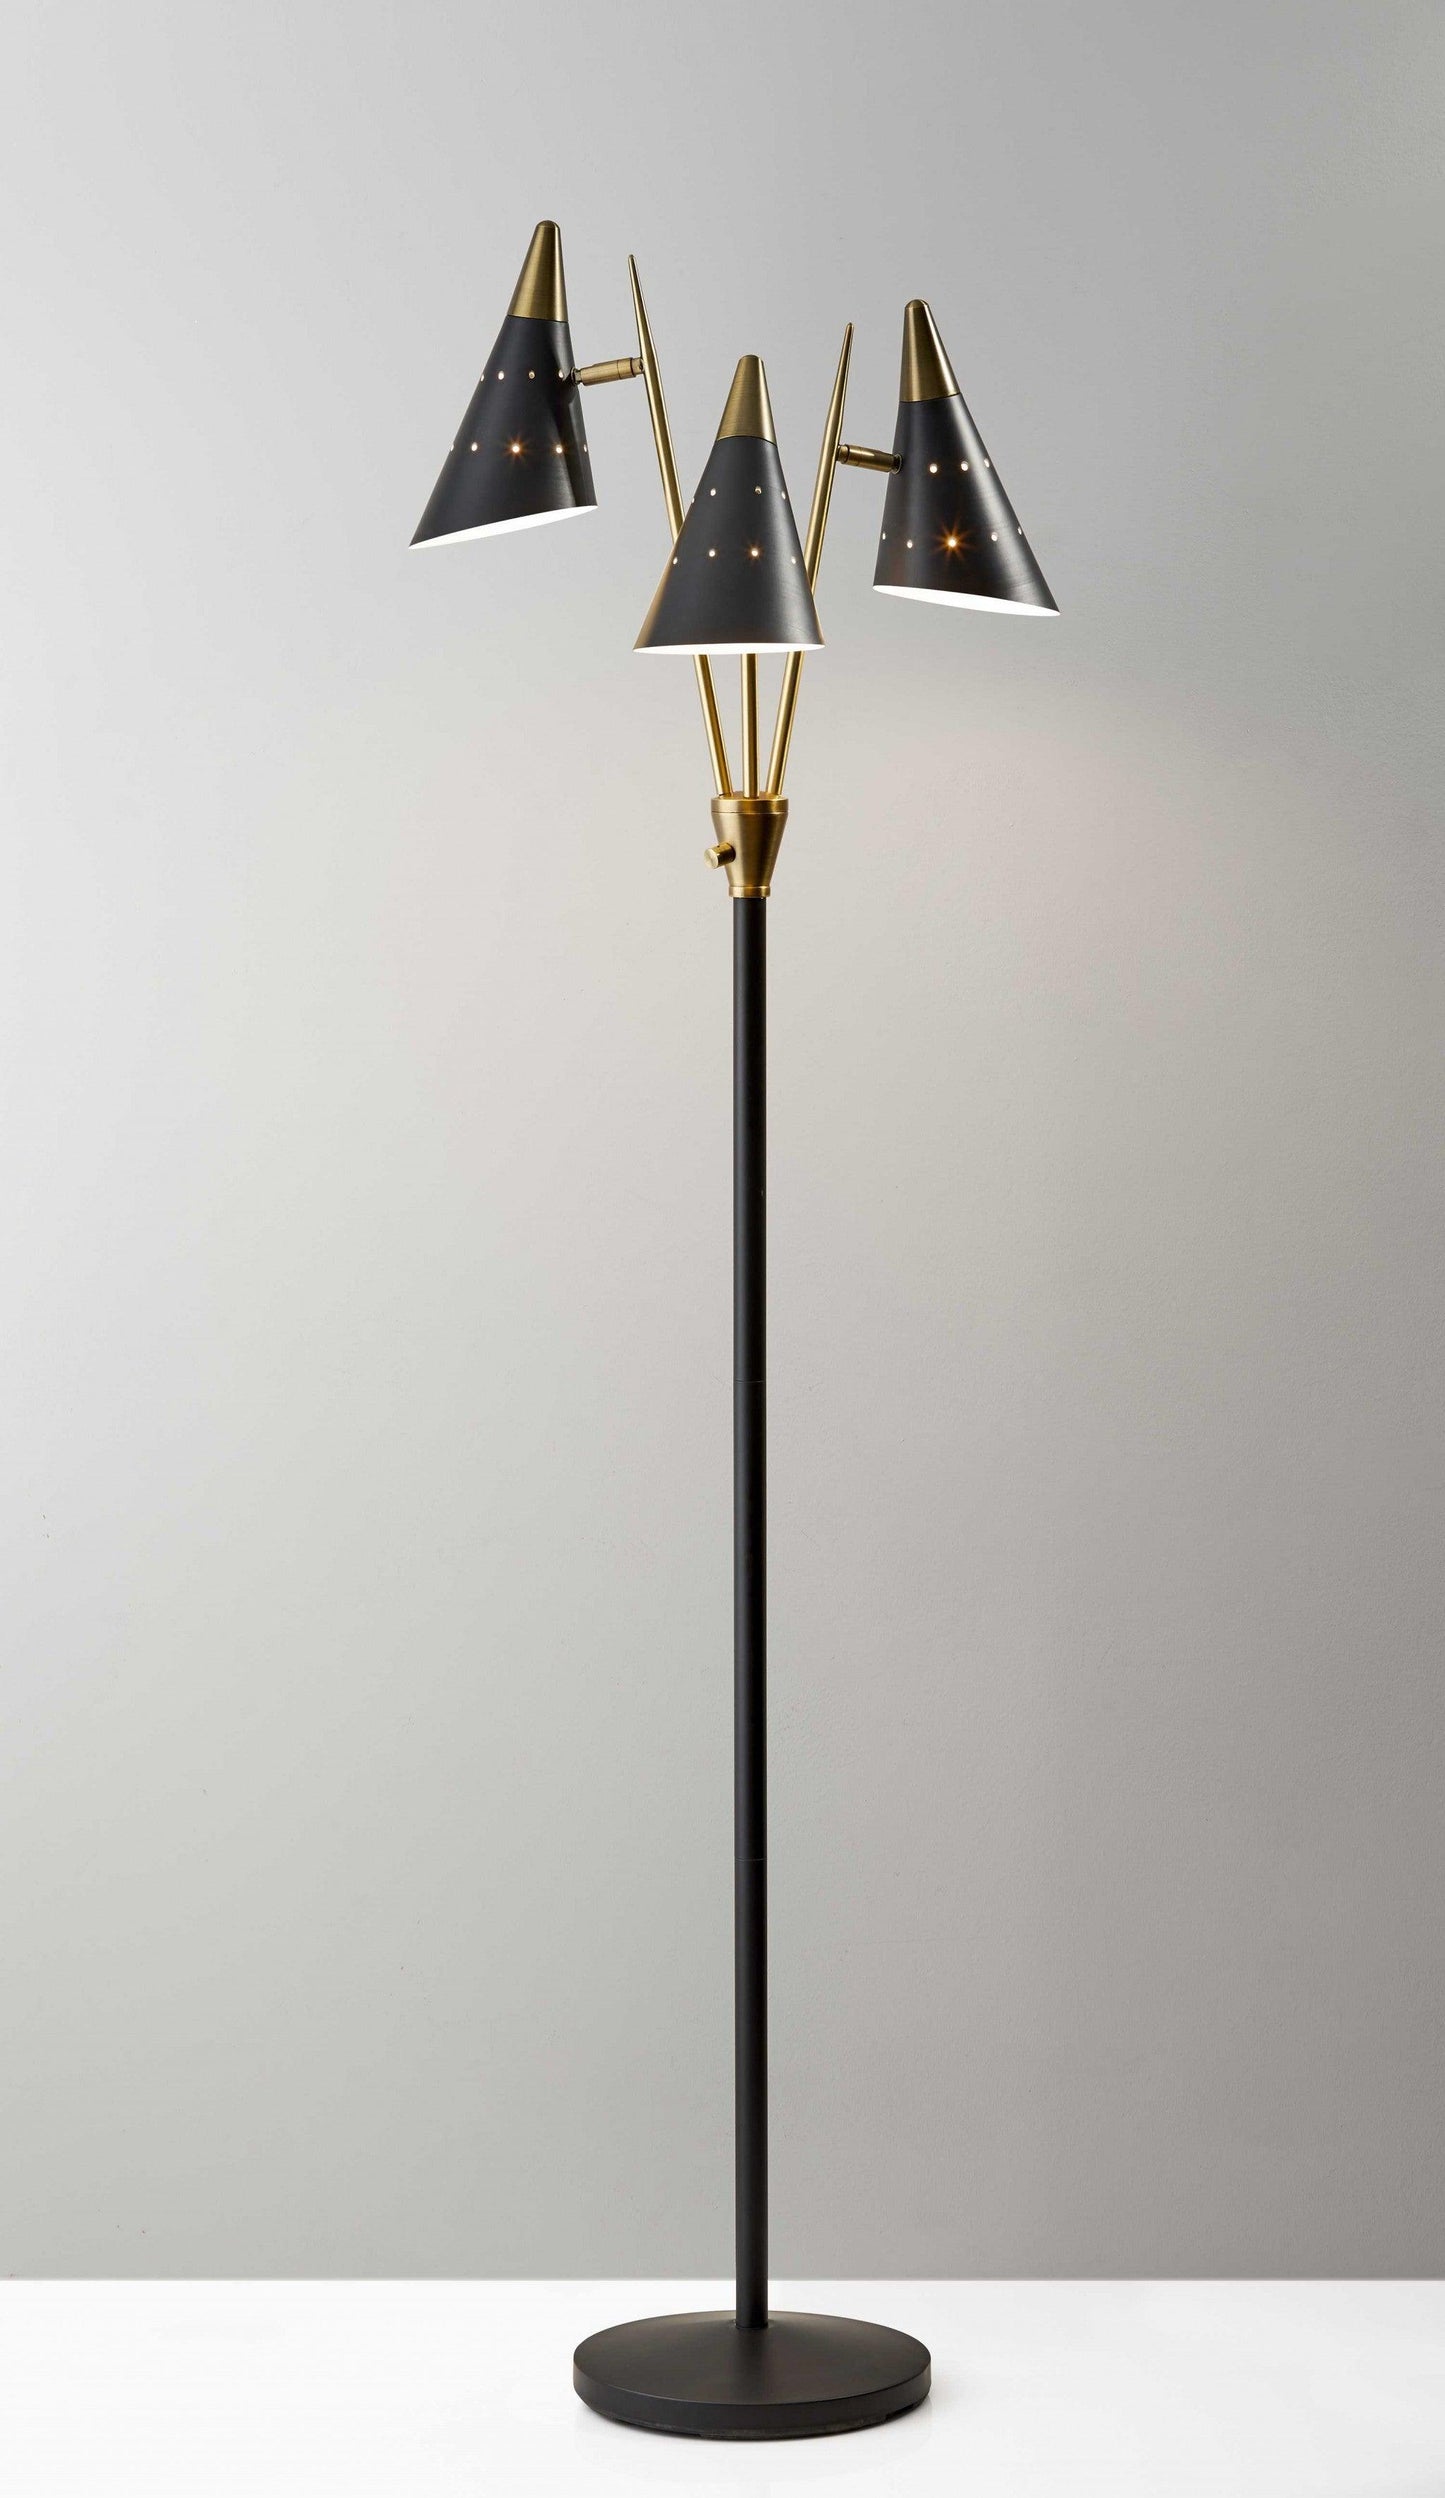 Black Metal Floor Lamp with Three Adjustable Antique Brass Accented Cone Shades - AFS